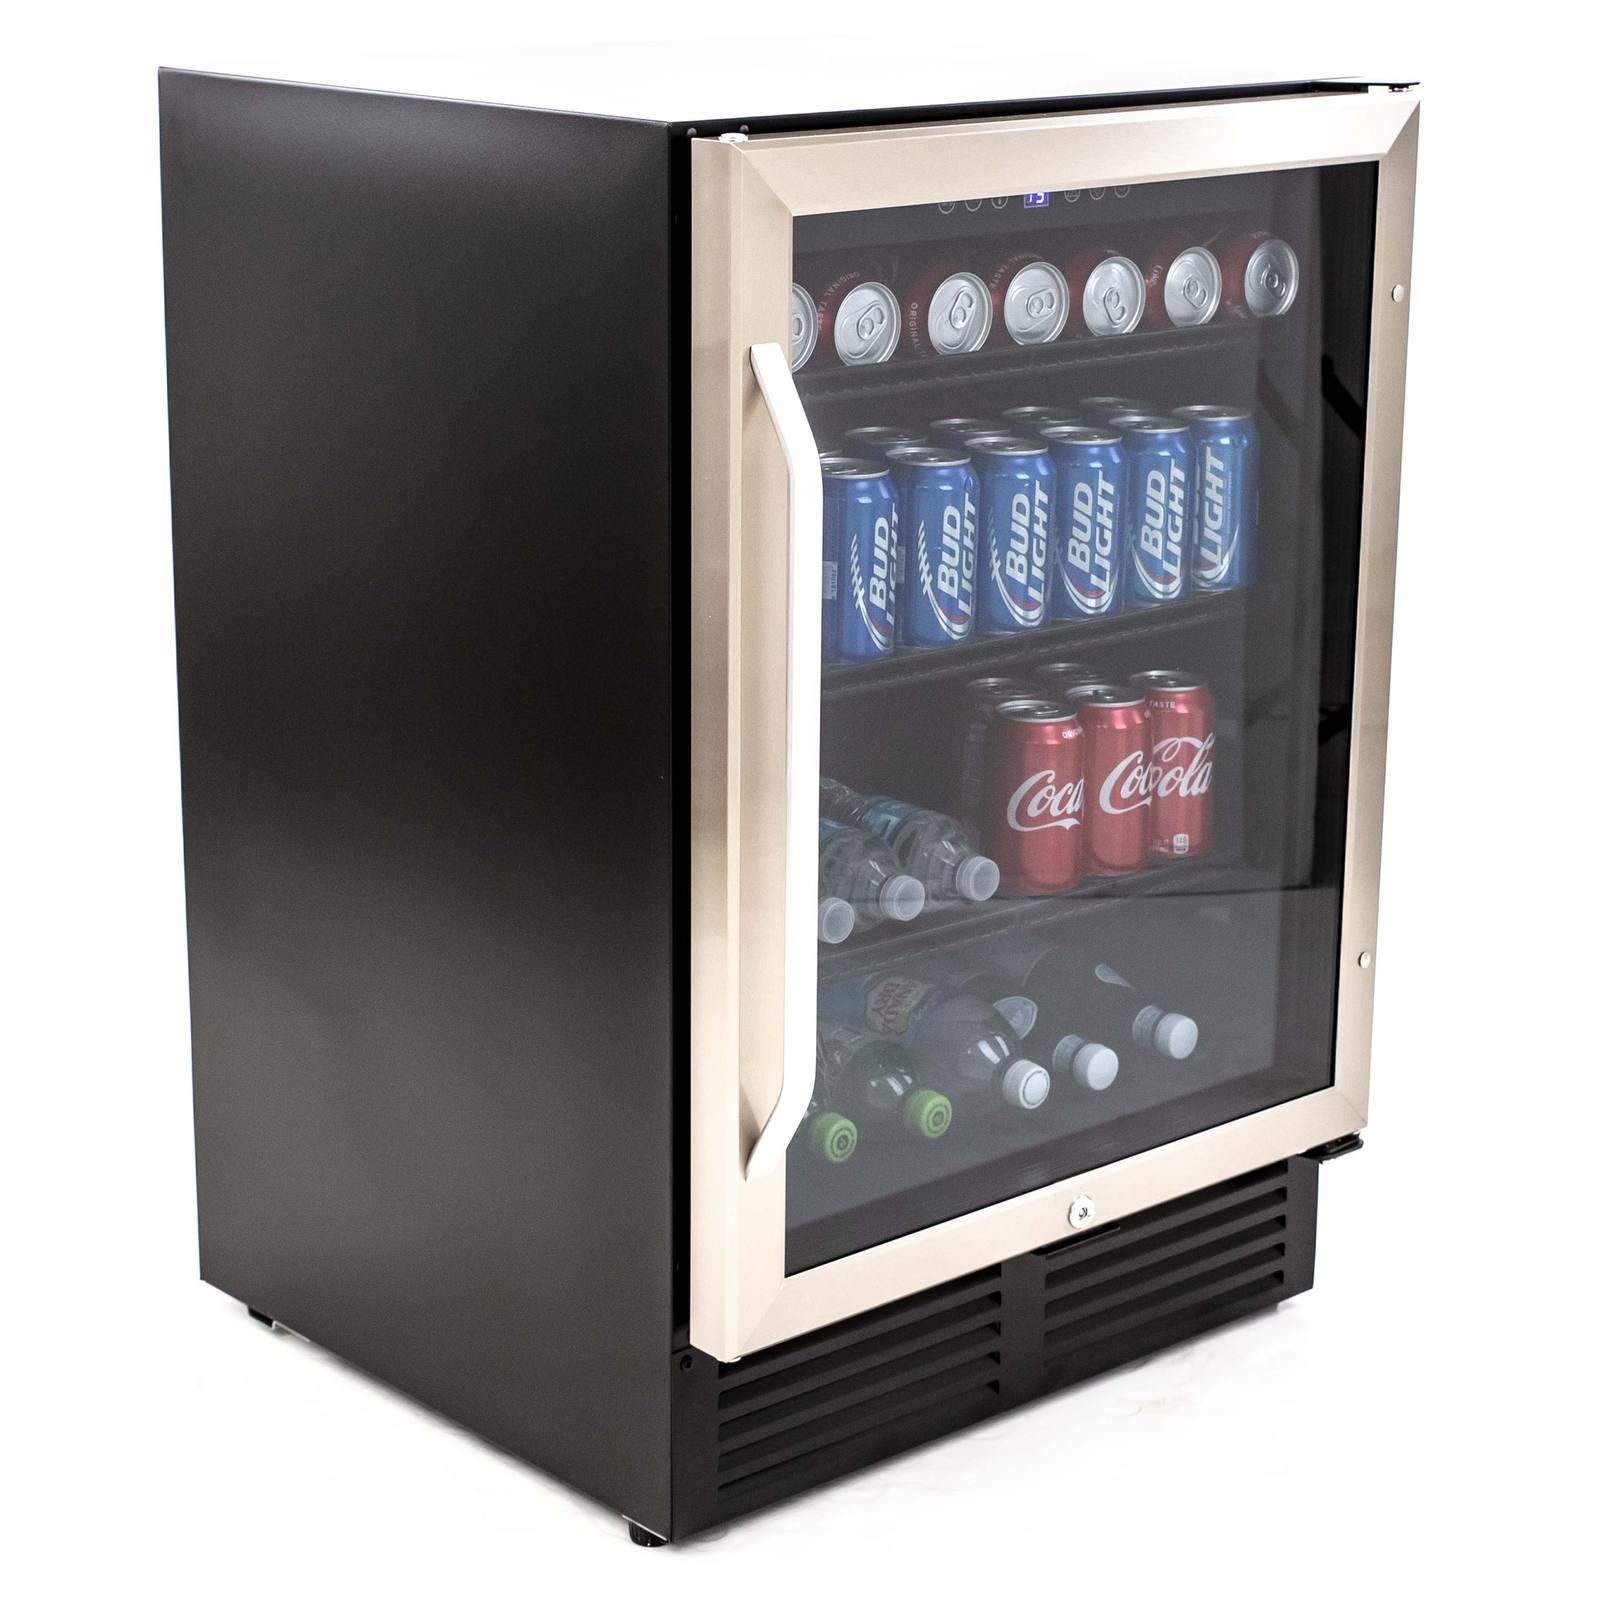 Avanti Beverage Center, 130 Can Capacity - Stainless Steel / 5.0 cu. ft.